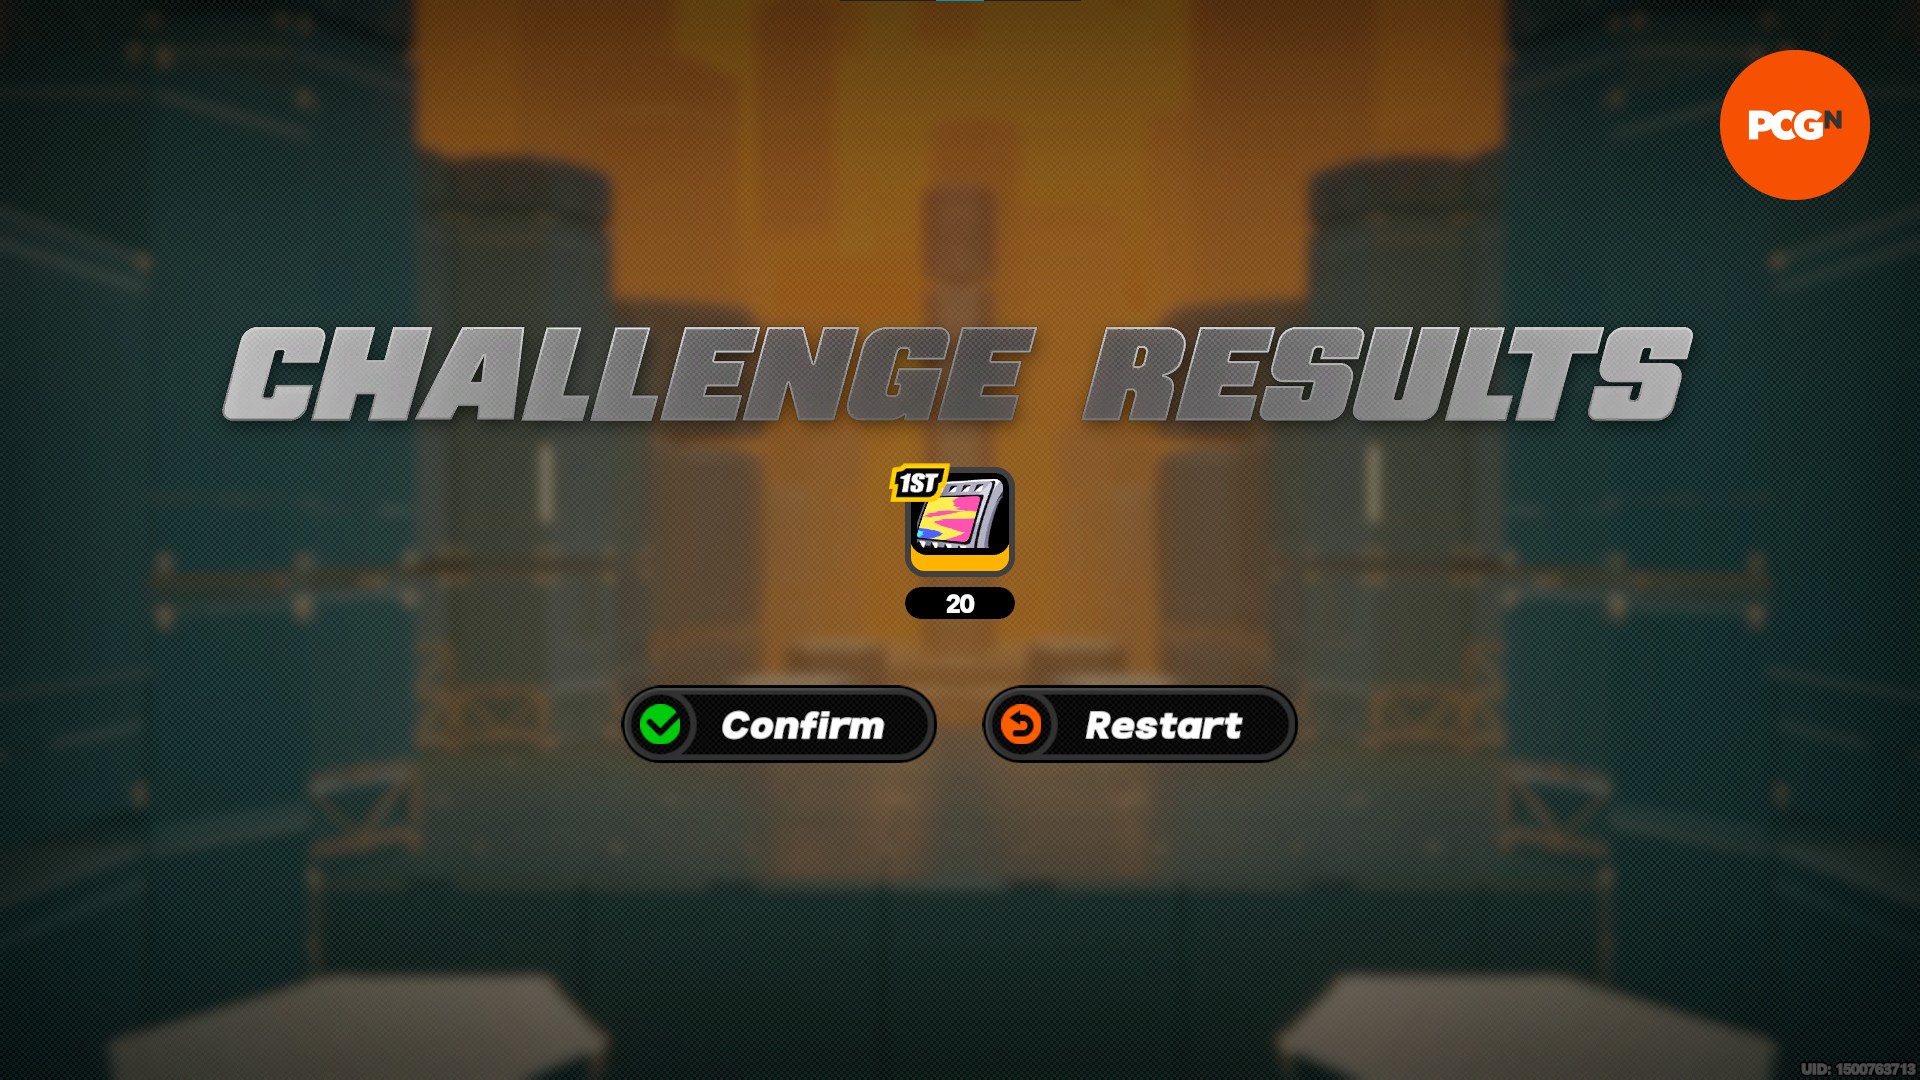 The "Challenge Results" screen after completing an Agent Demo, showing a reward of 20 Zenless Zone Zero Polychrome.